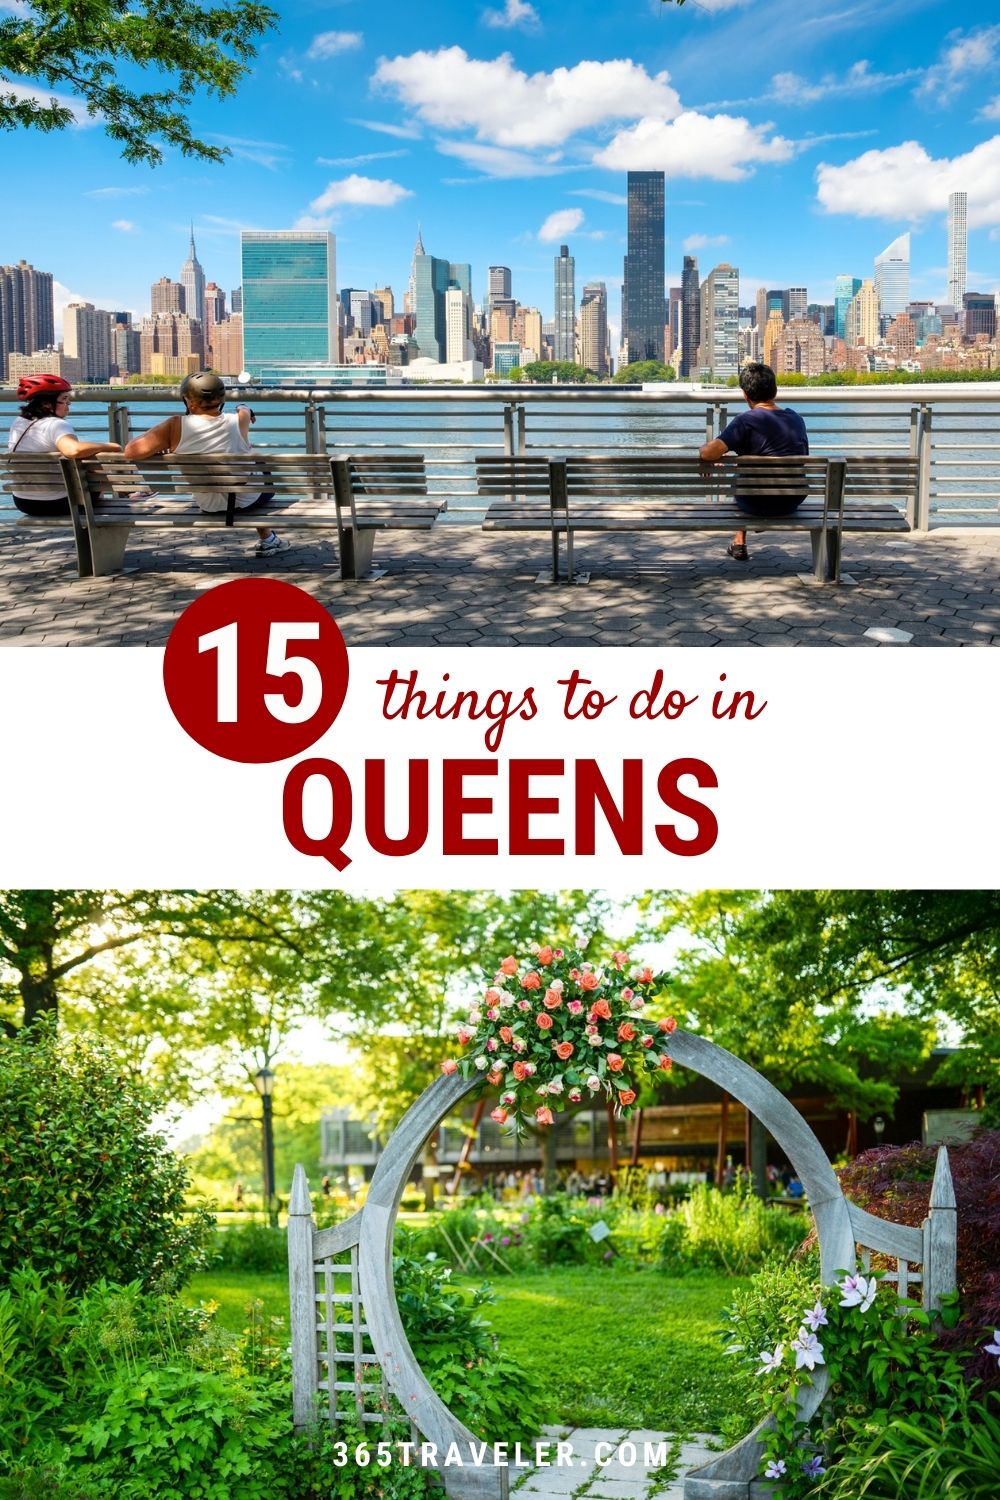 15 AWESOME THINGS TO DO IN QUEENS YOU CAN'T MISS